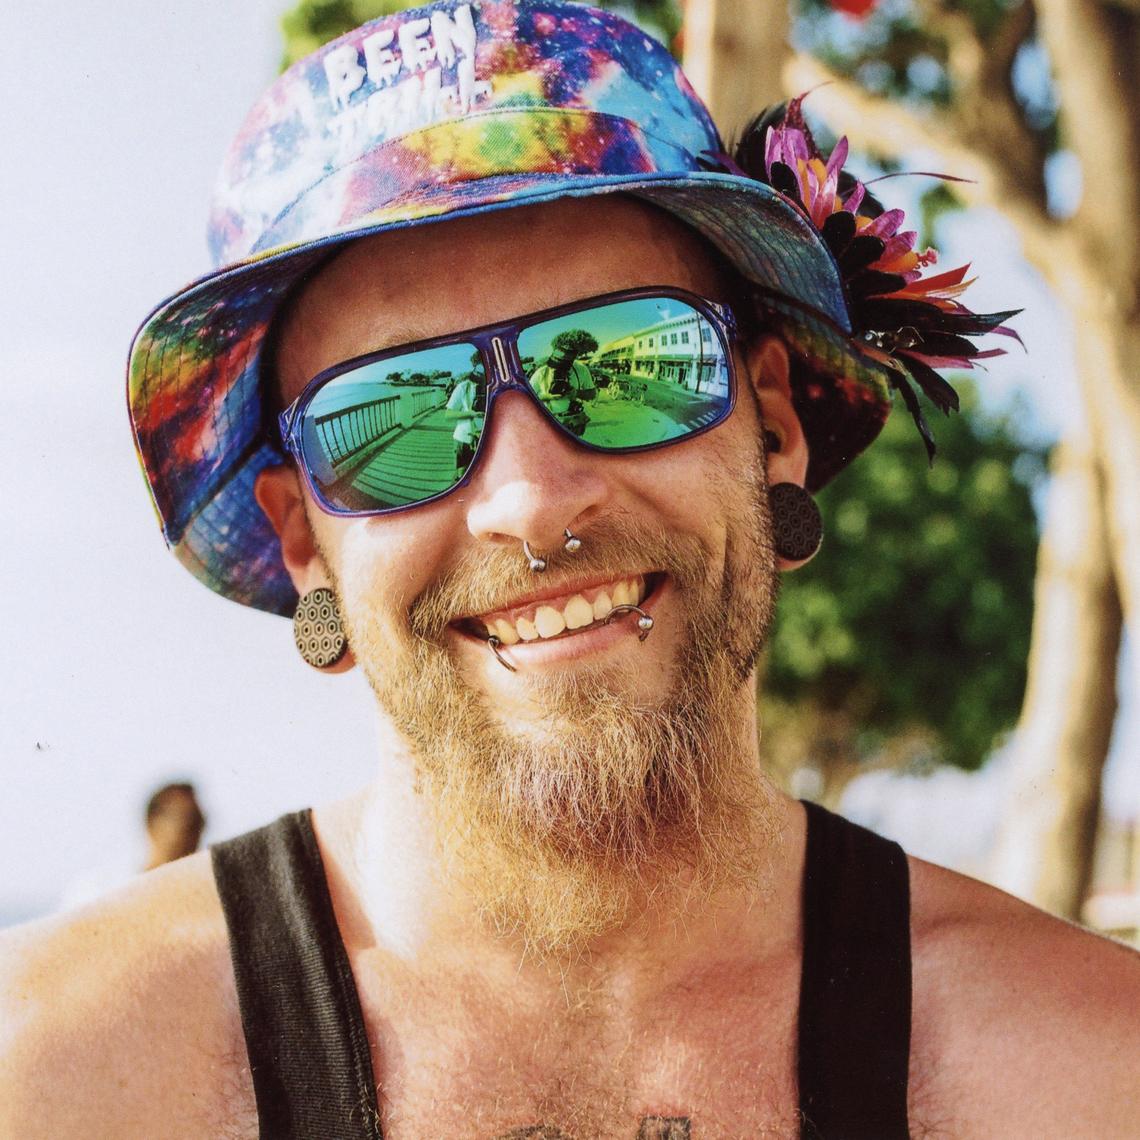 Portrait of a smiling student with a blonde beard, mirrored sunglasses, rainbow bucket hat, and piercings